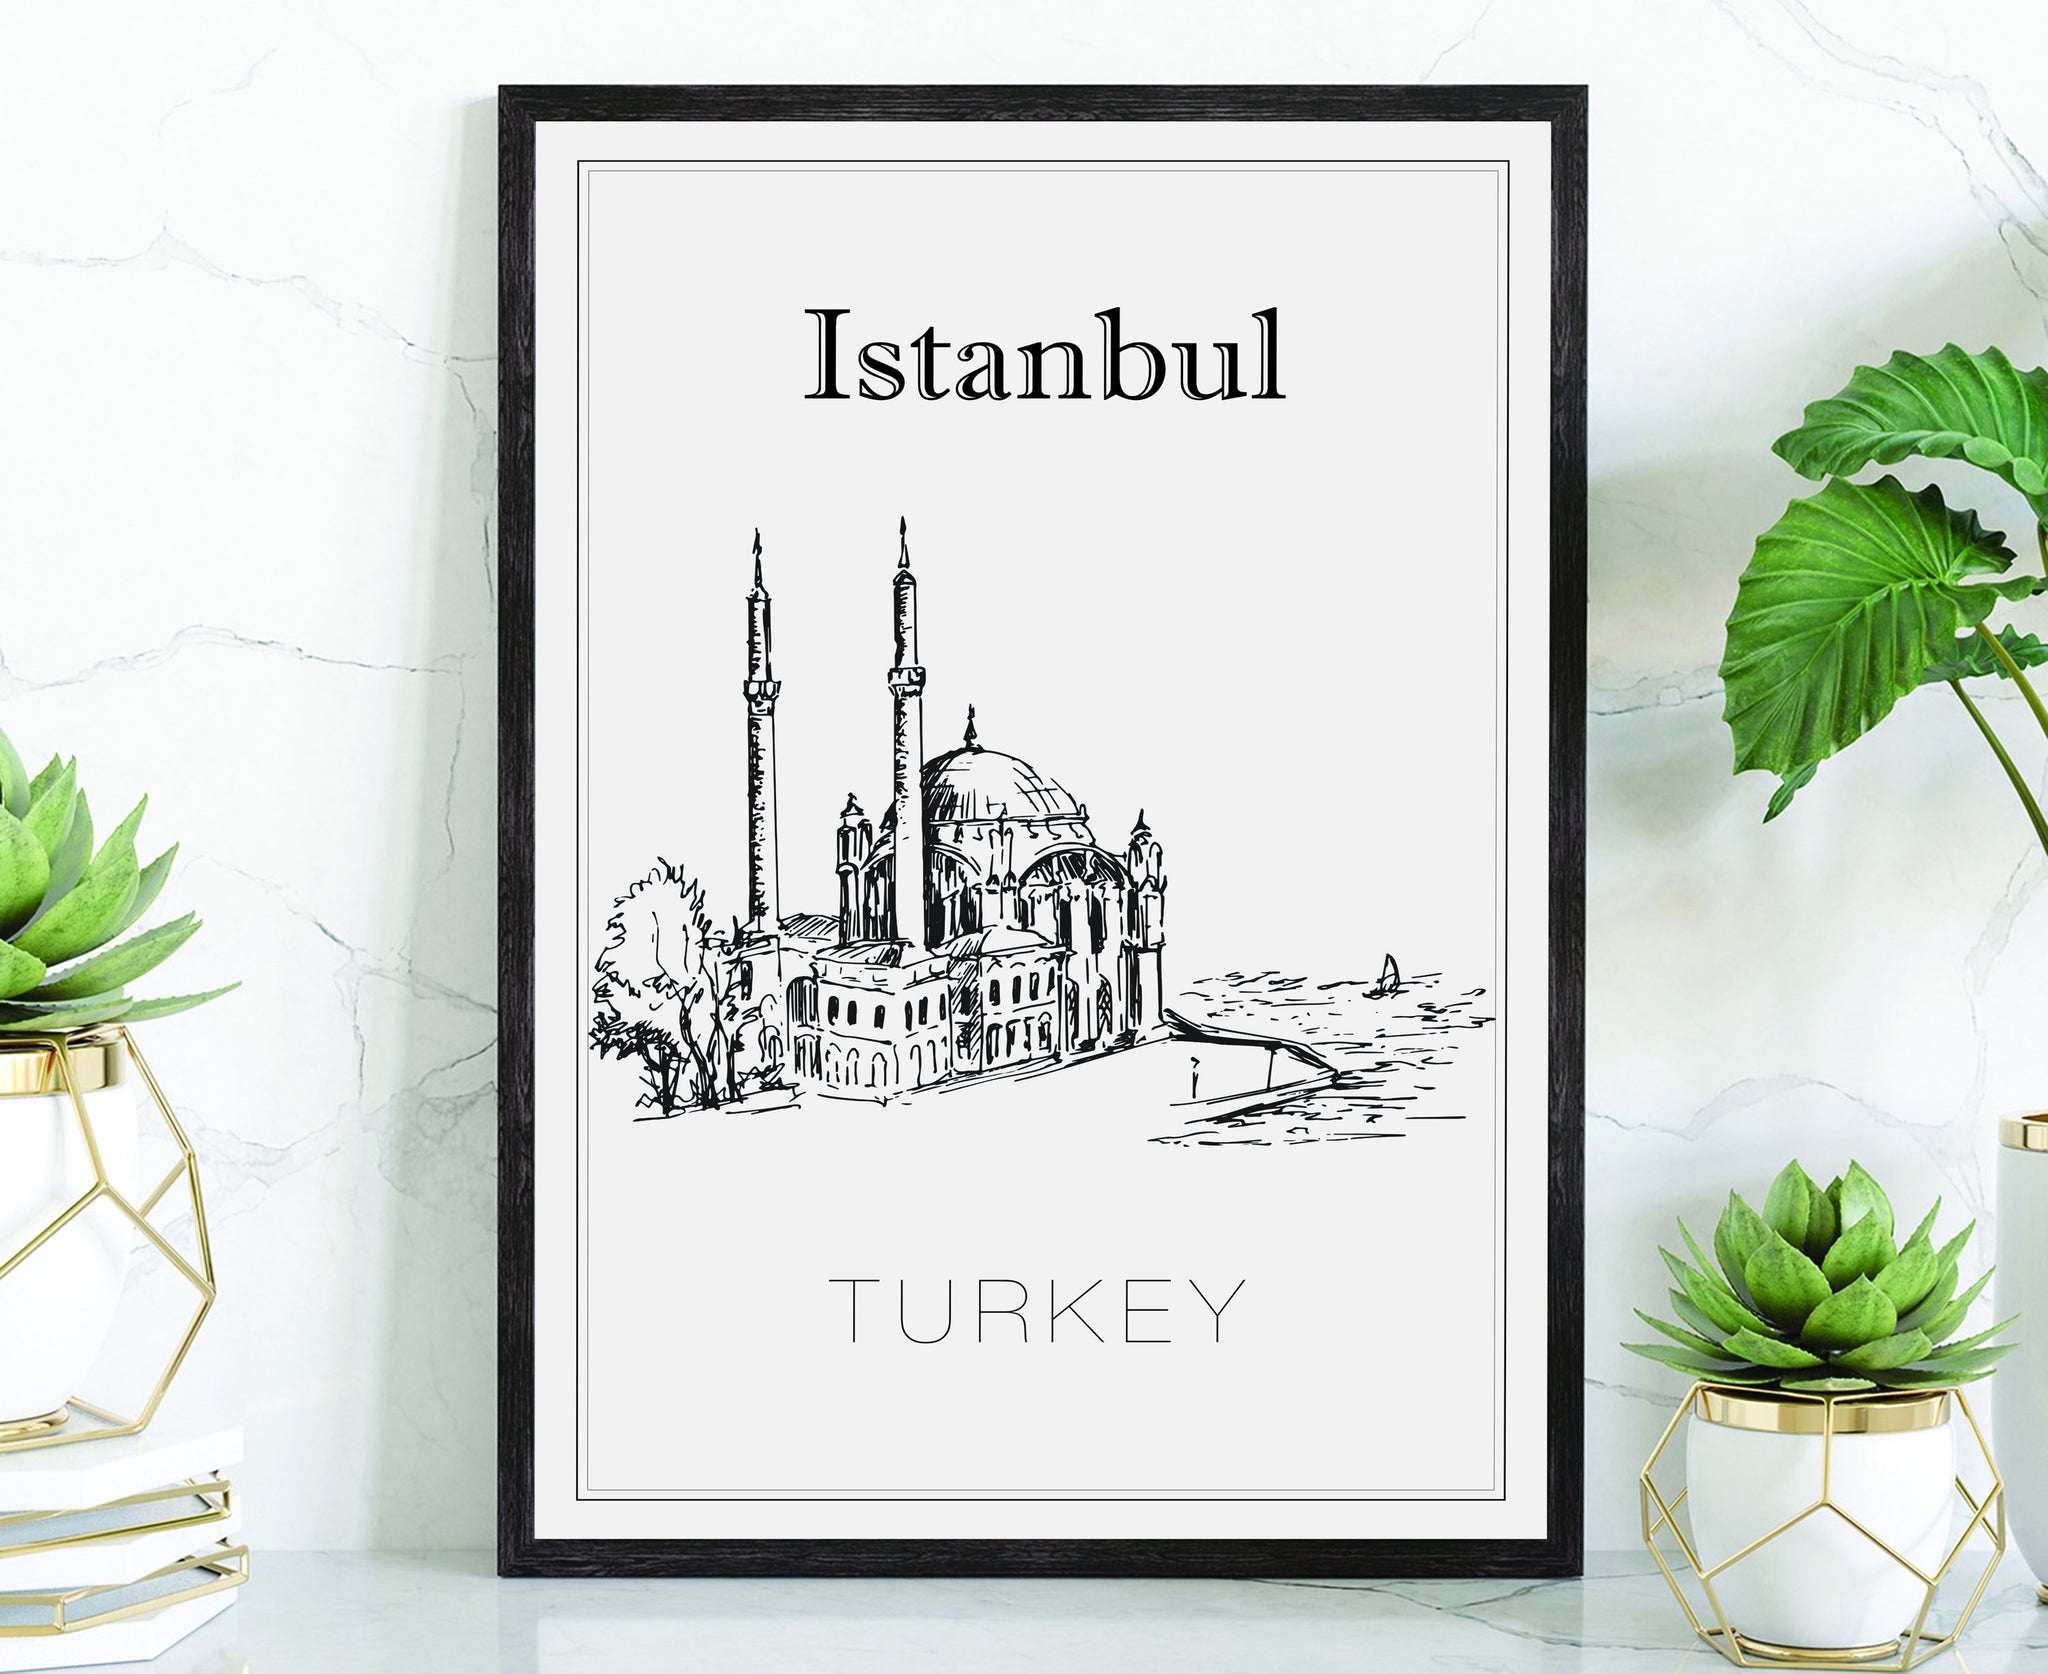 Hand Drawn Poster, Istanbul Travel Poster, Turkey Istanbul Poster Wall Art, Istanbul Cityscape and Landmark Map, City Map Poster For Home